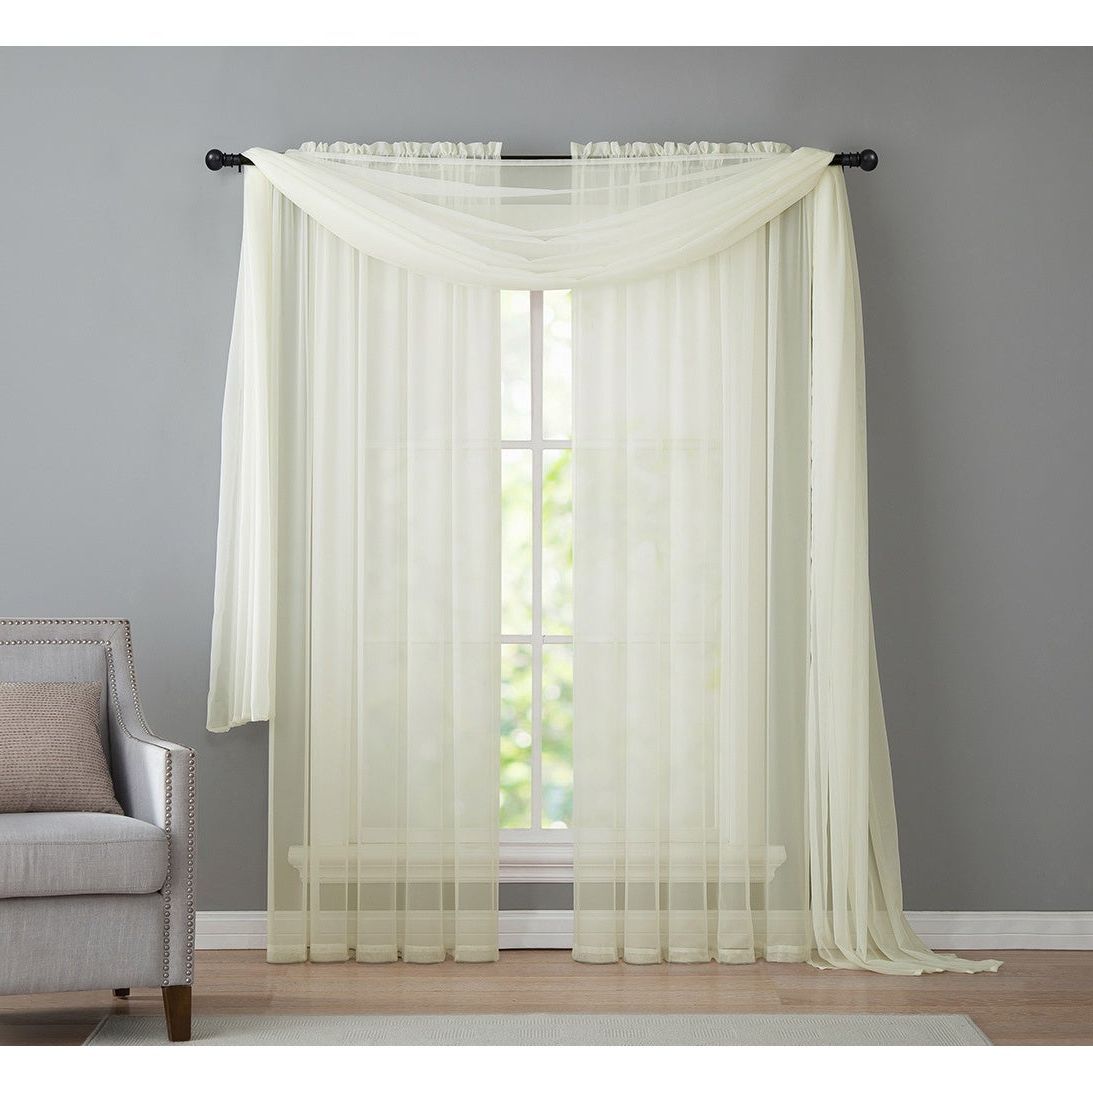 Recent Vcny Infinity Sheer Rod Pocket Curtain Panel Within Infinity Sheer Rod Pocket Curtain Panels (View 1 of 20)